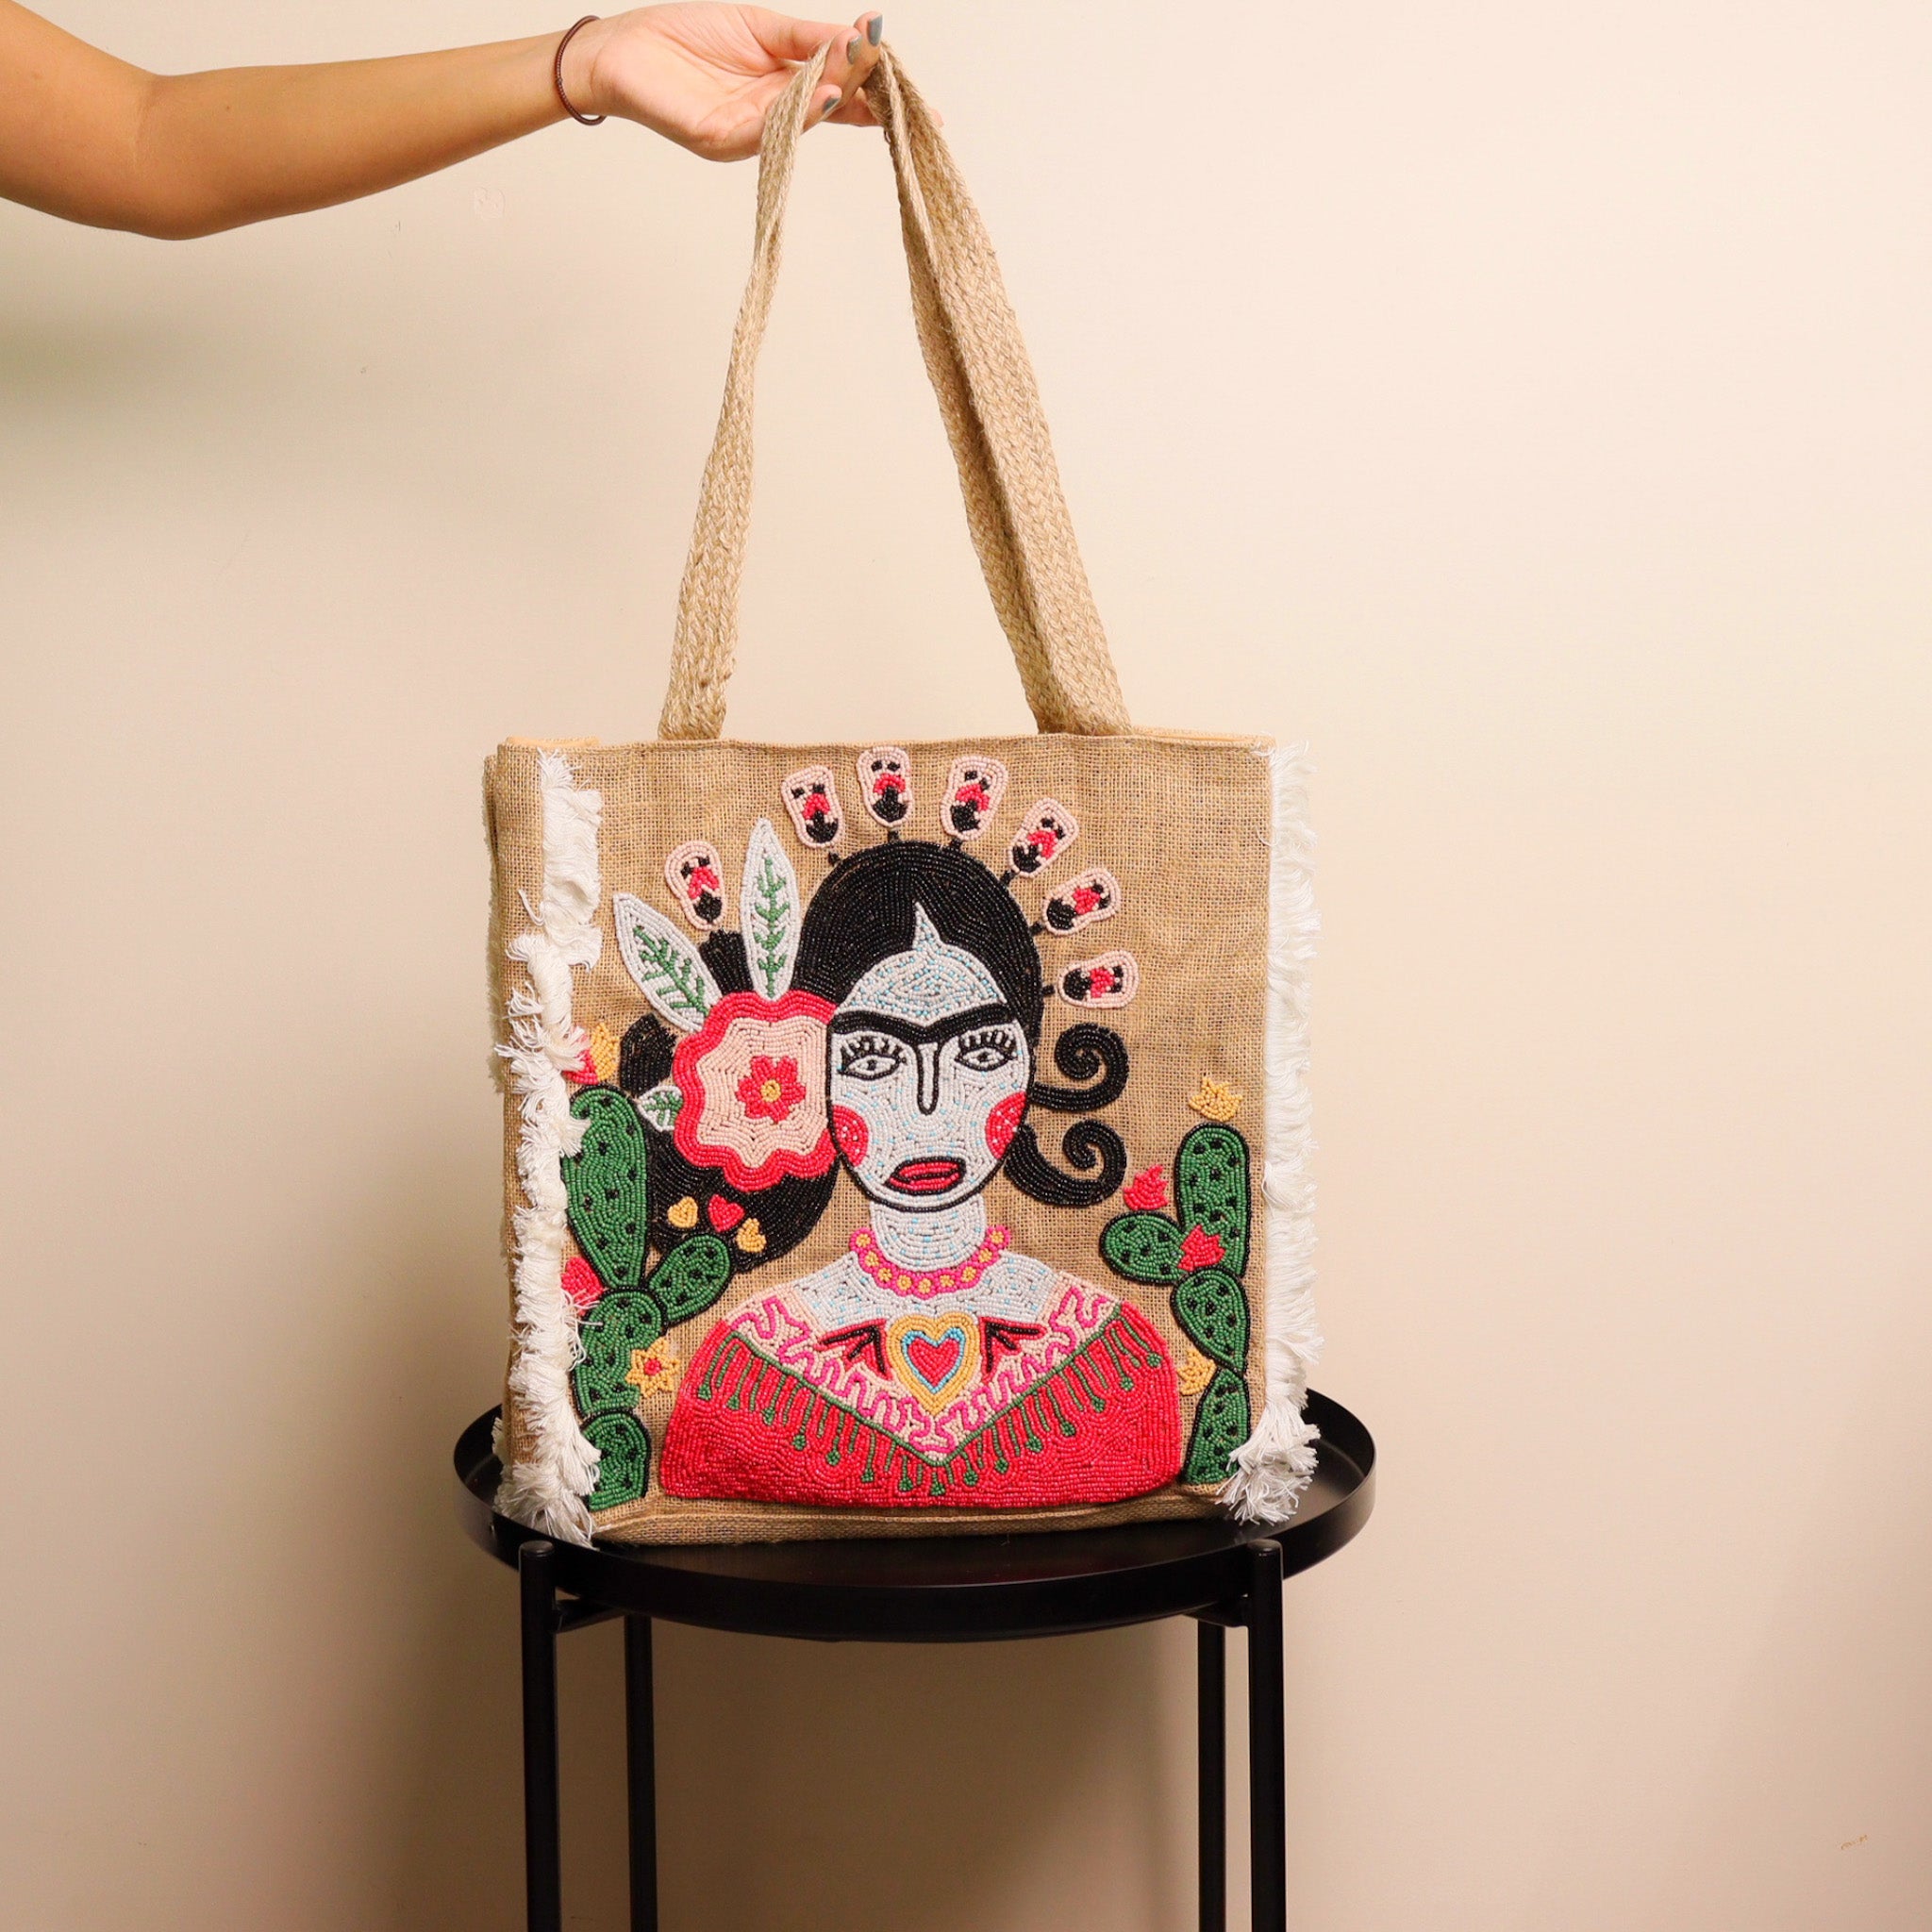 Jute Your majesty Bag